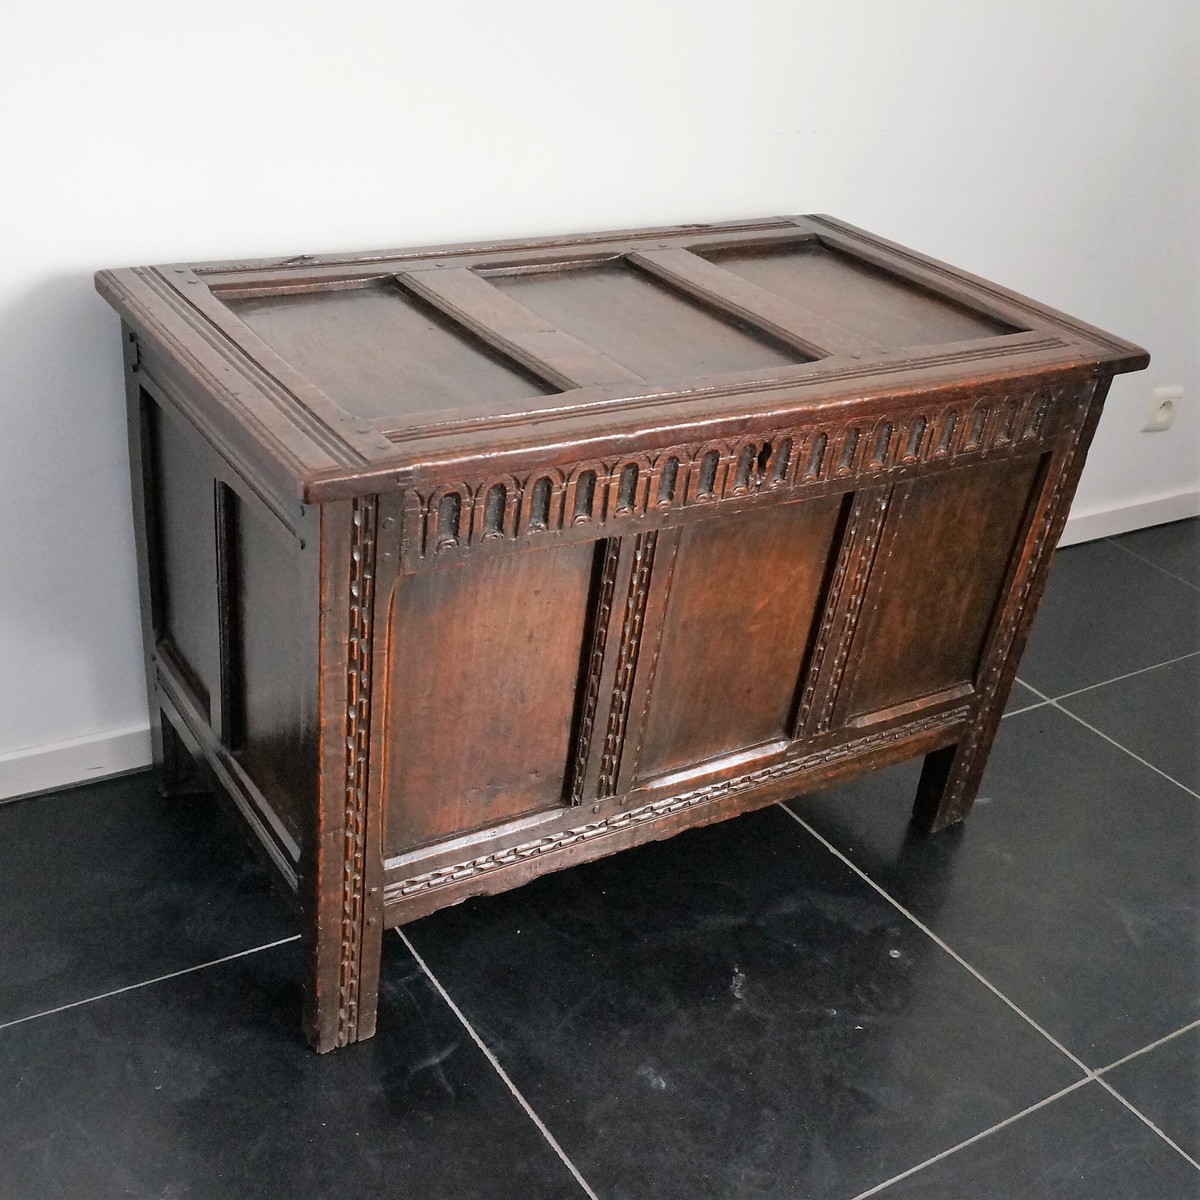 late 17th century A Late 17th Century Small Oak Chest With Nice Panels And Color